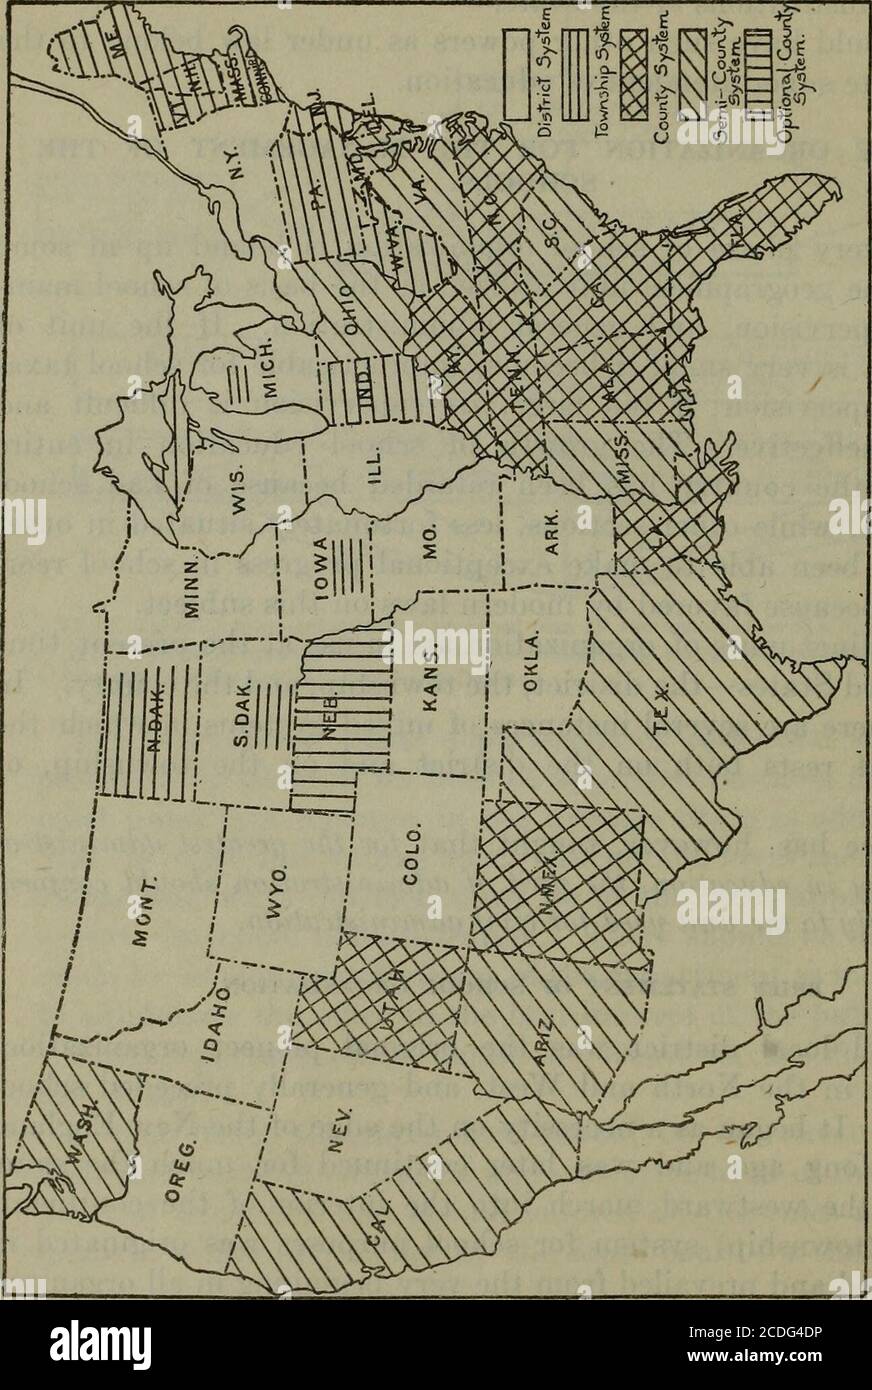 . A manual of educational legislation for the guidance of committees on education in the state legislatures . North and West, and generally preceded schoollegislation. It began as a necessity on the edge of the New Englandwilderness long ago and was later continued for much the samereasons in the westward march into the interior of the continent.The town (township) system for school purposes was origmated inNew England and prevailed from the very beginning in all organizedtowns. County organization originated in the South. Here planta-tion life prevailed, agricultural areas were large, with a Stock Photo